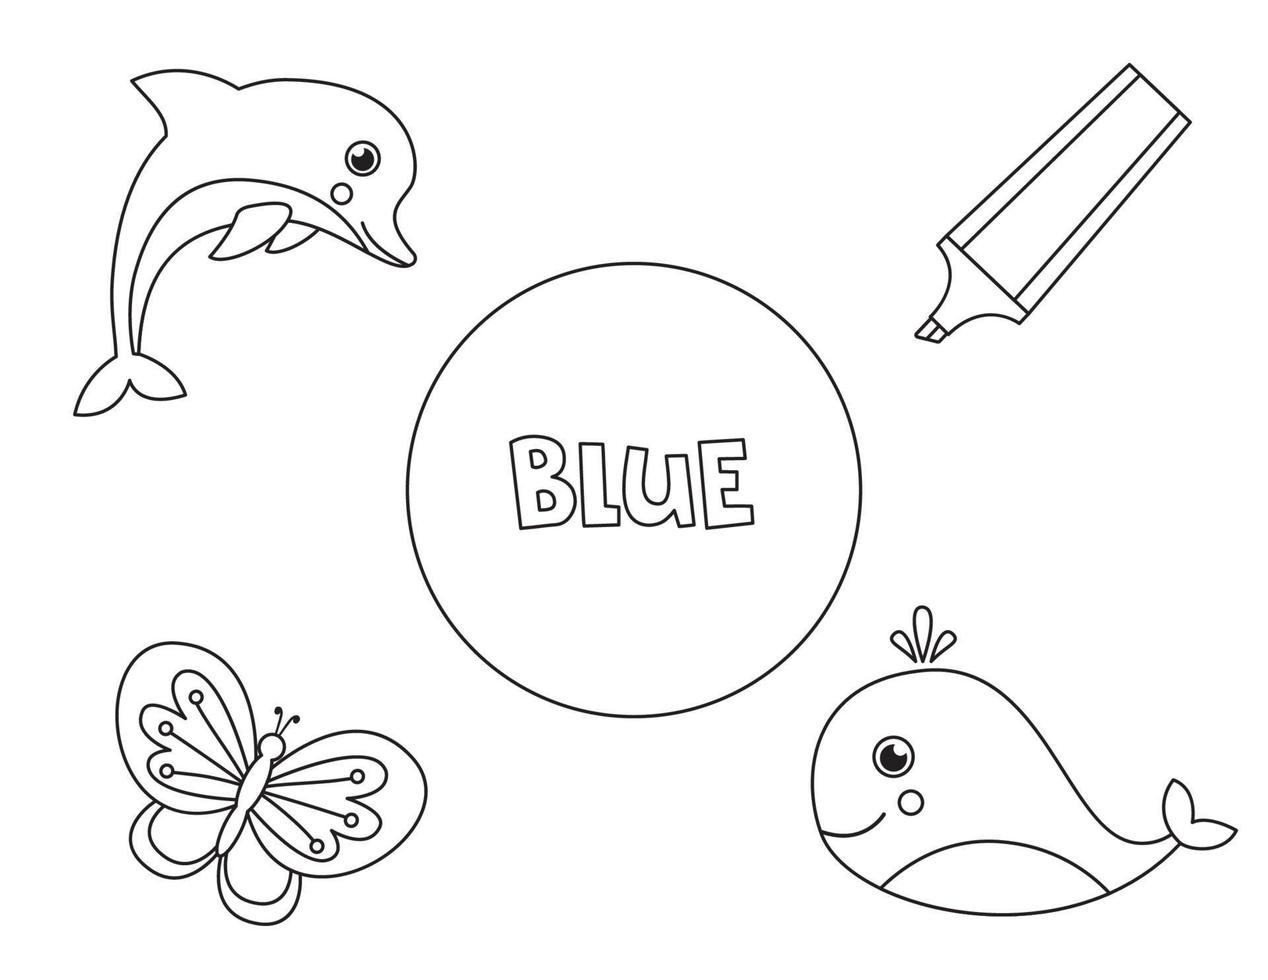 Color all blue objects. Learning basic colors for kids. vector